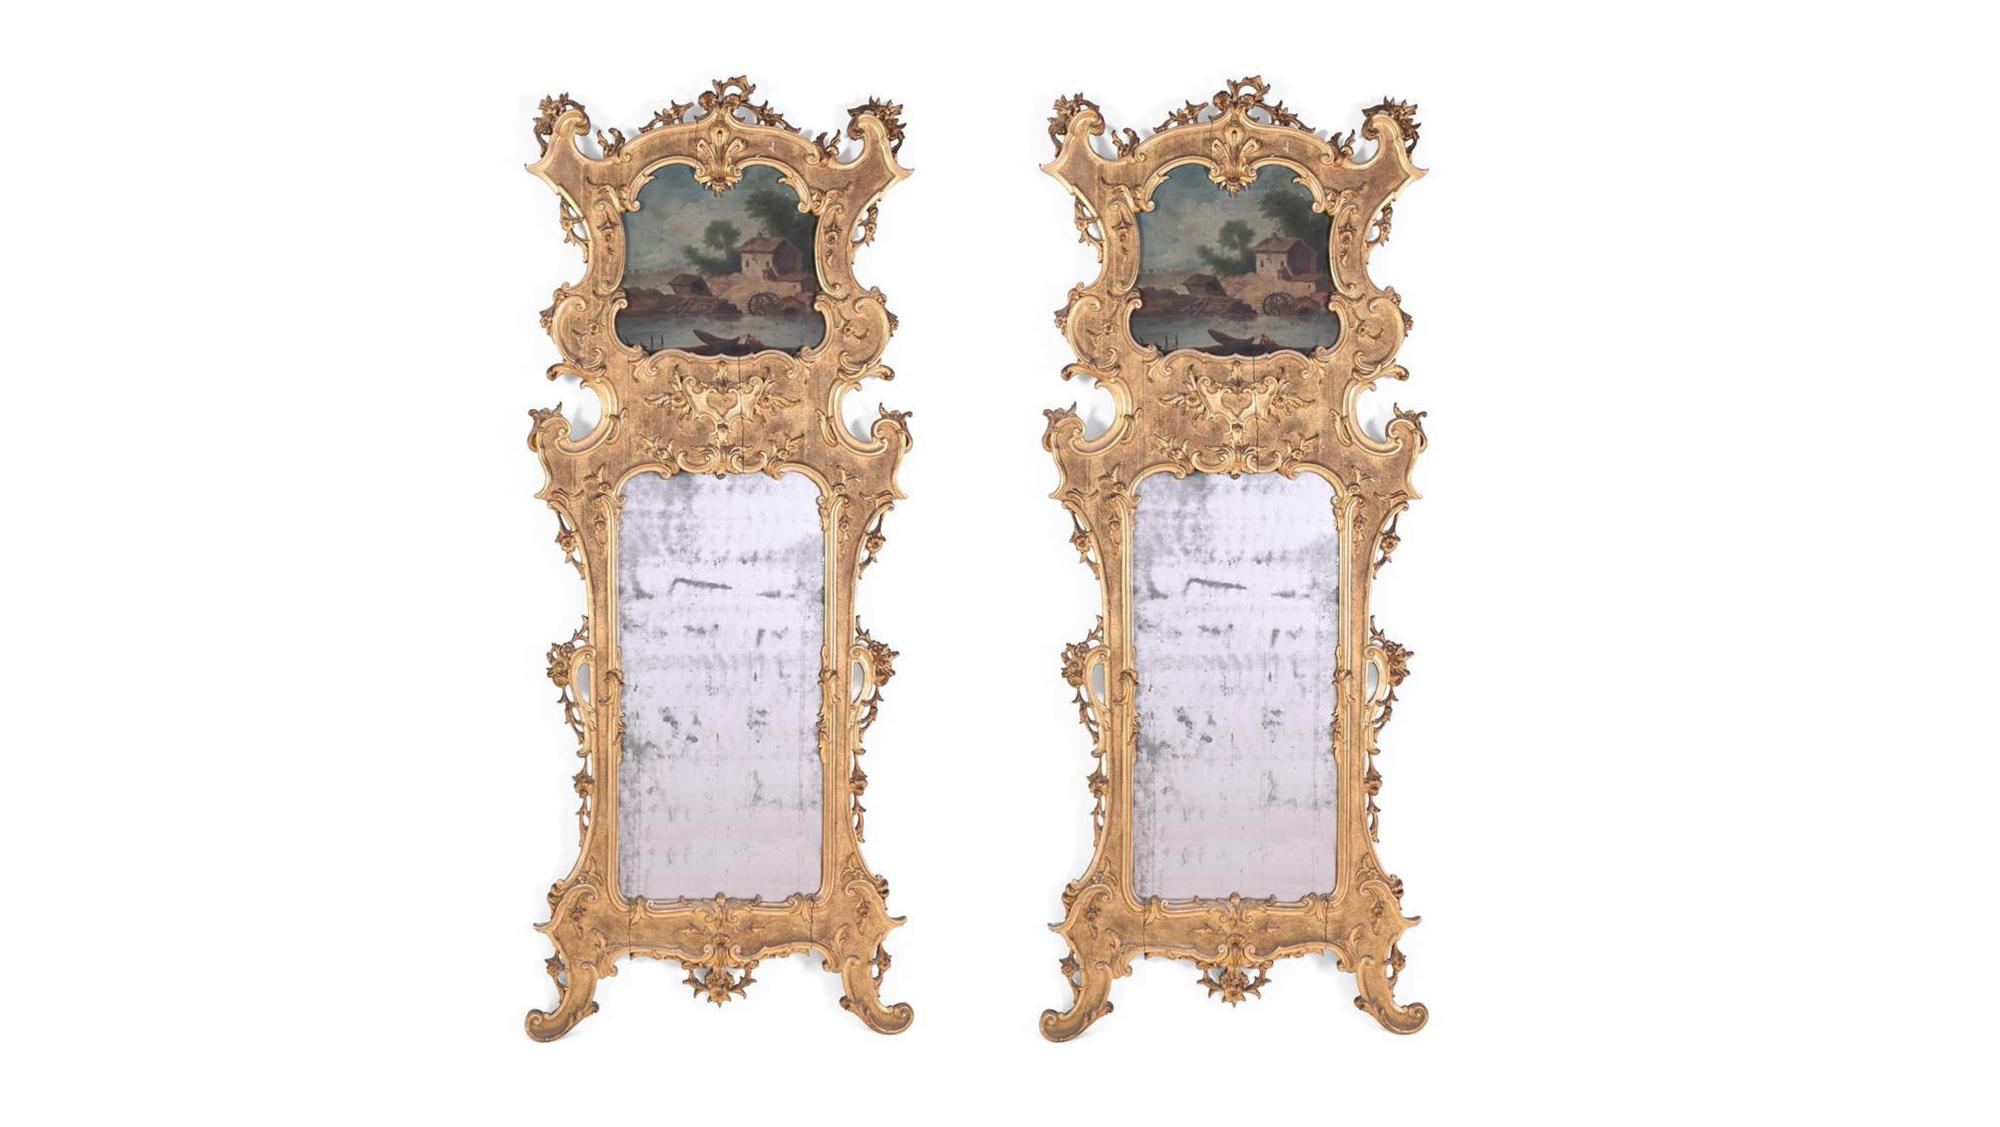 Irish Pair 19th Century Giltwood Trumeau Pier Mirrors With Period Compartmental Plates For Sale